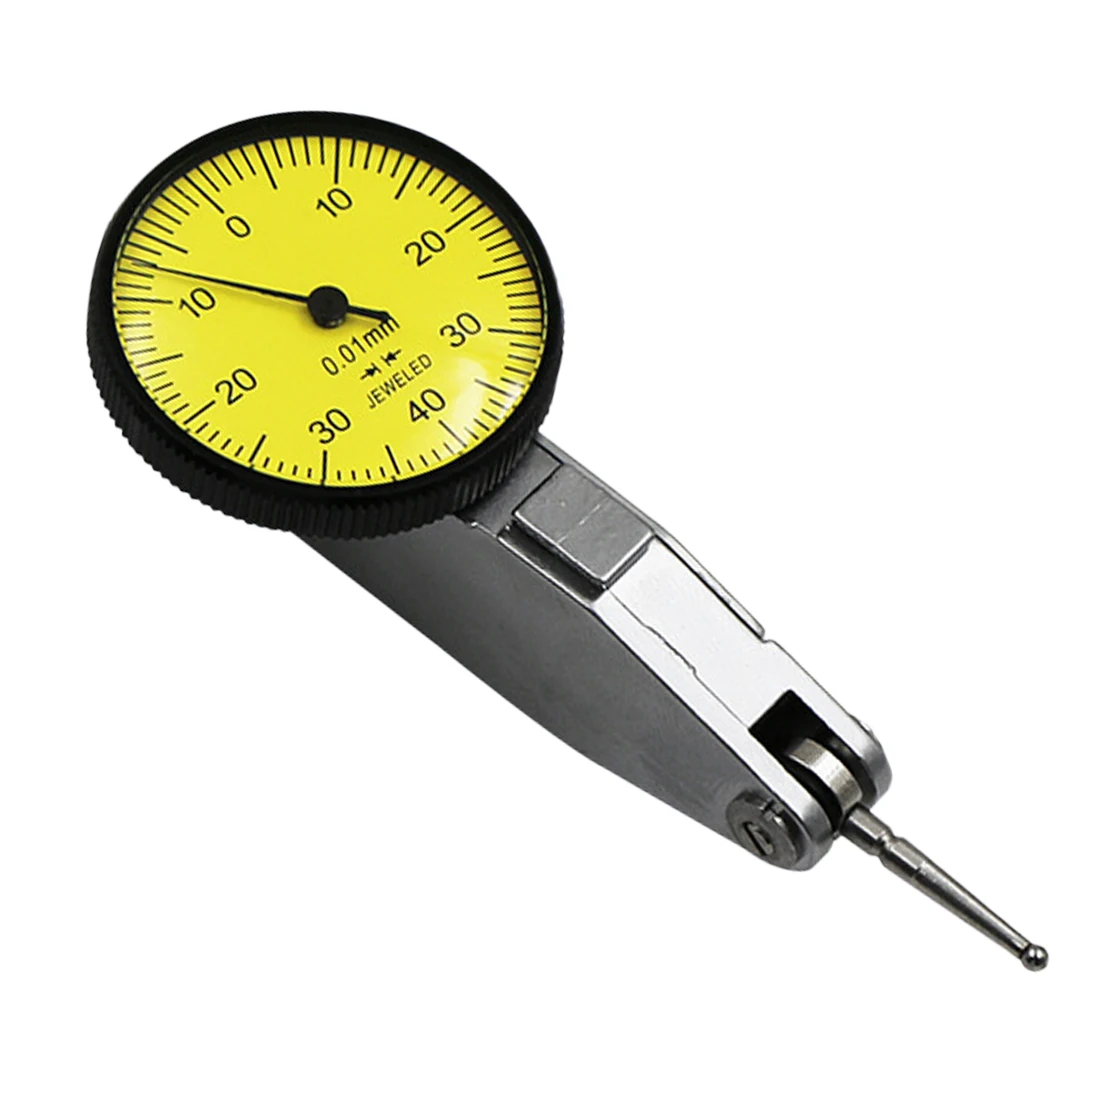 Professional Lever Dial Test Indicator Meter Tool Kit PRECISION 0.01mm Gage 